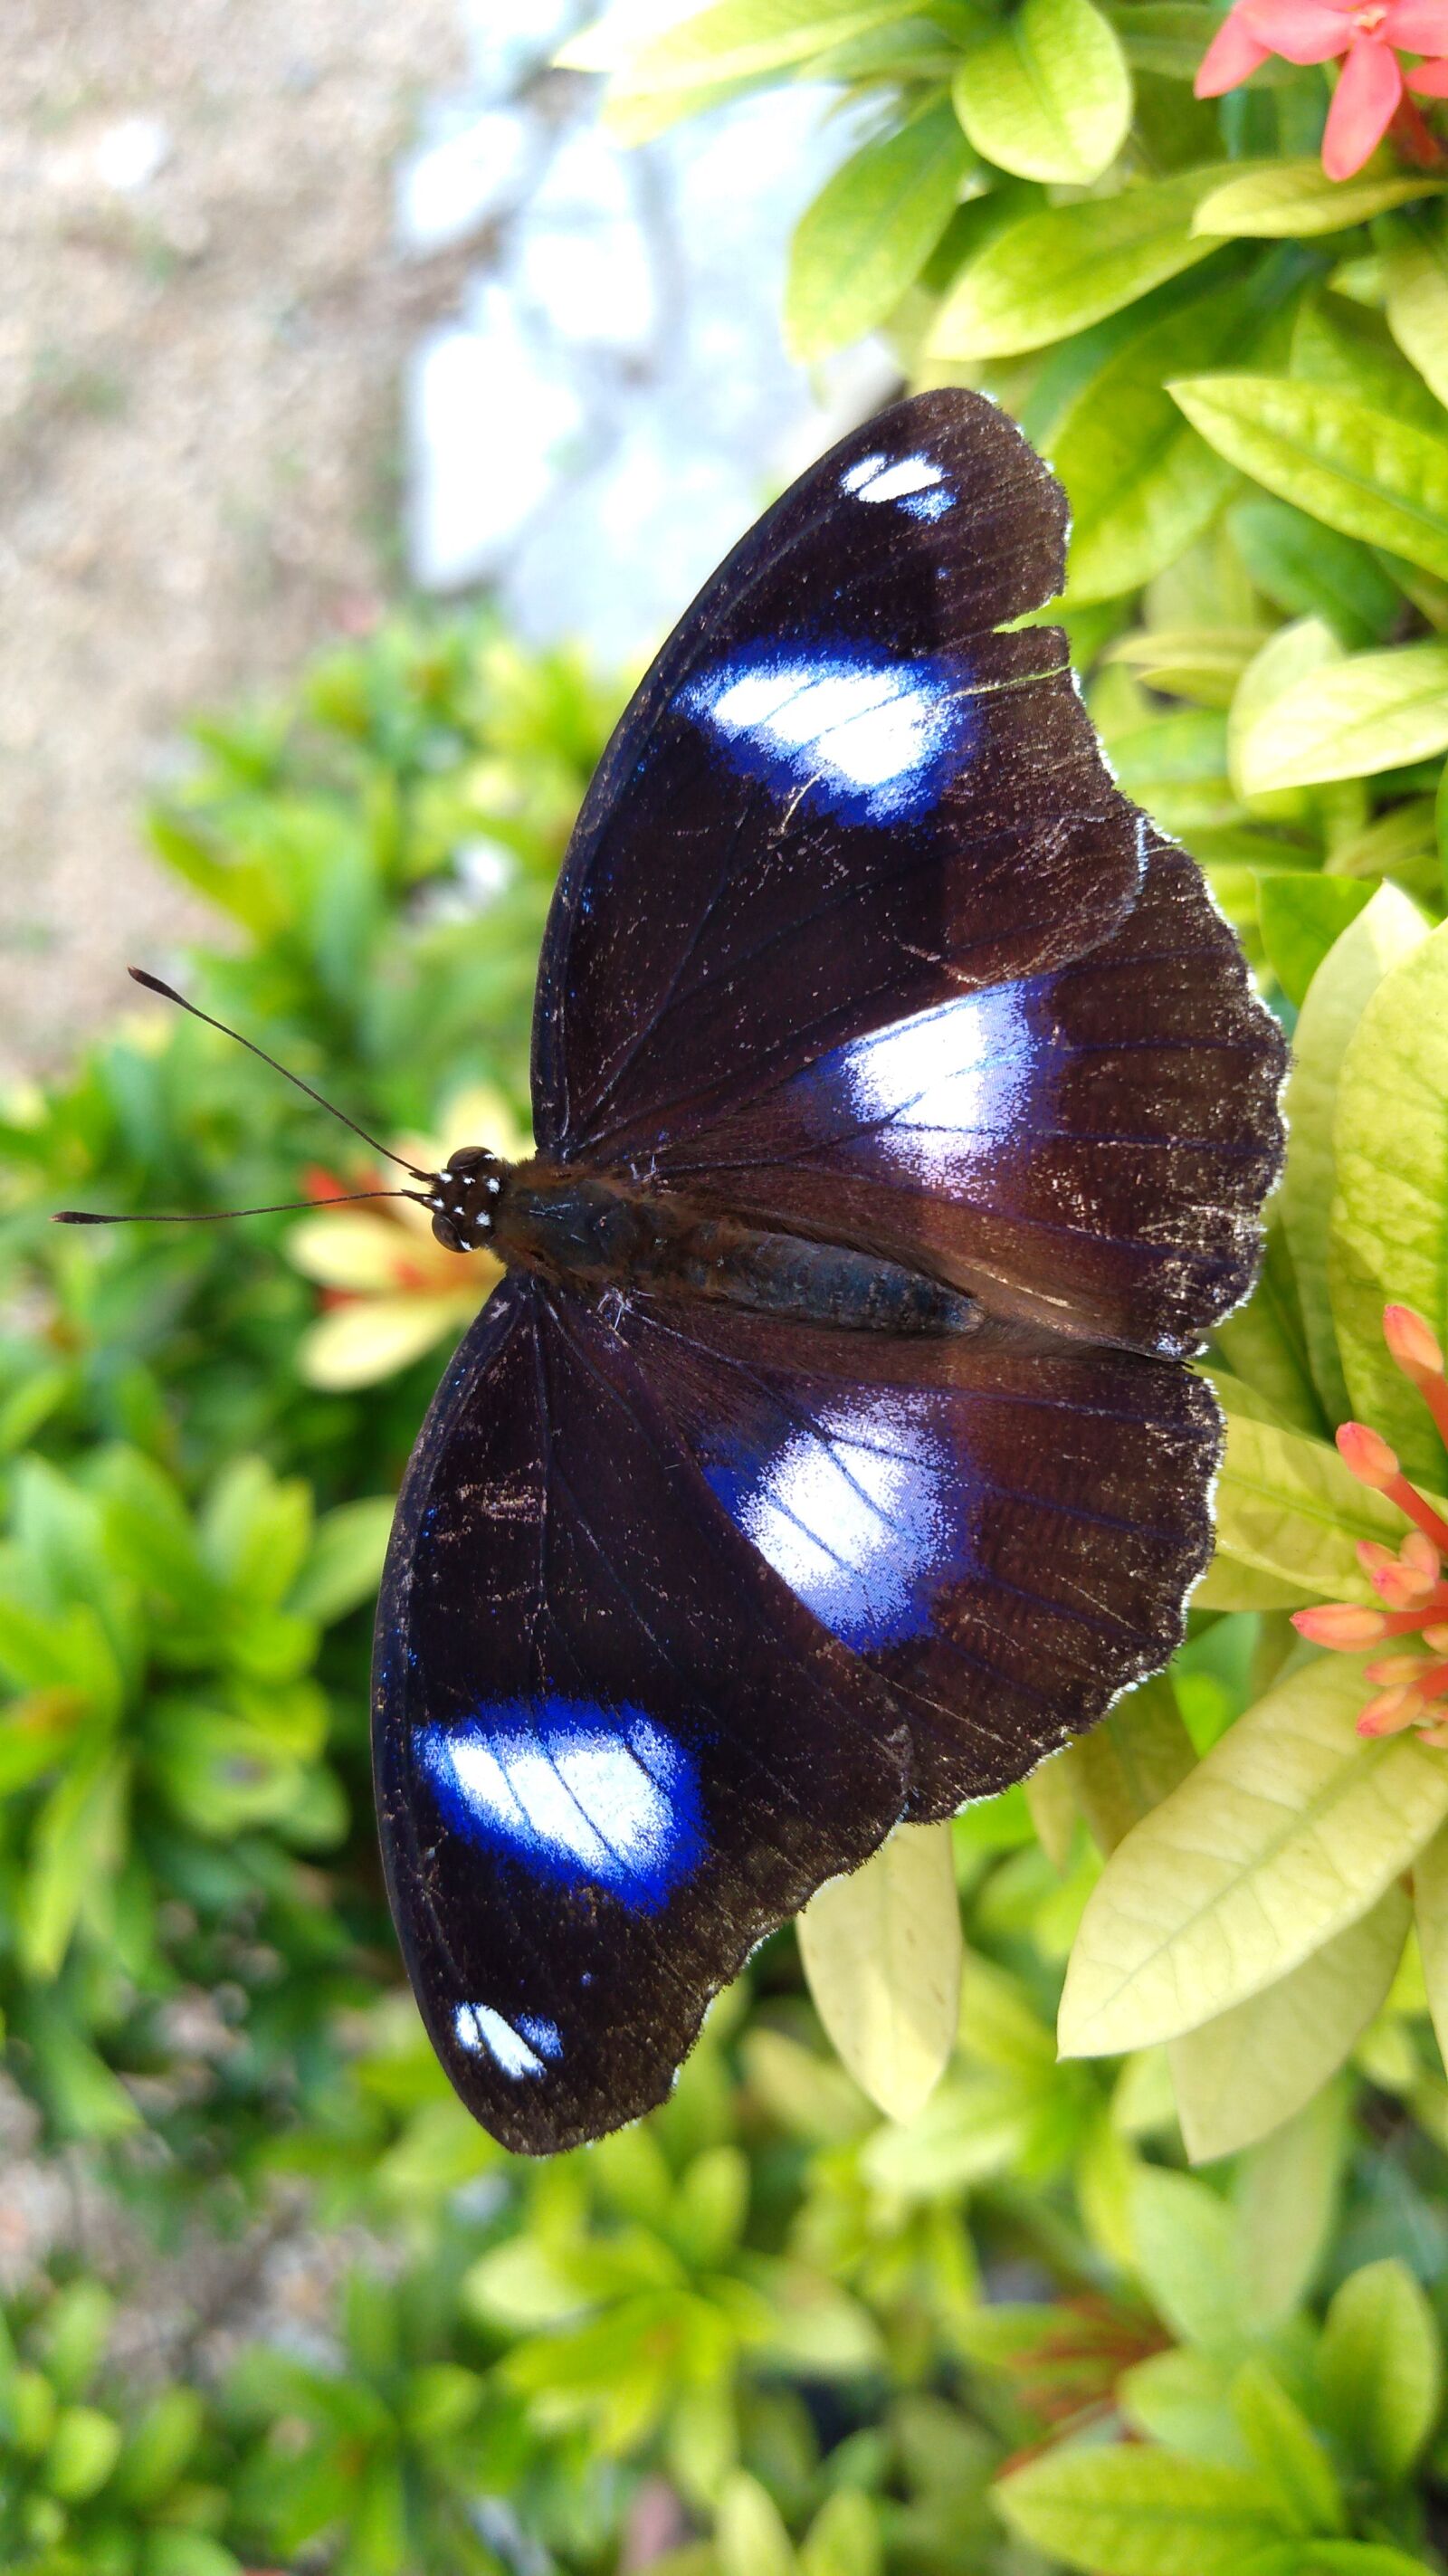 ASUS X01AD sample photo. Butterfly, garden, nature photography